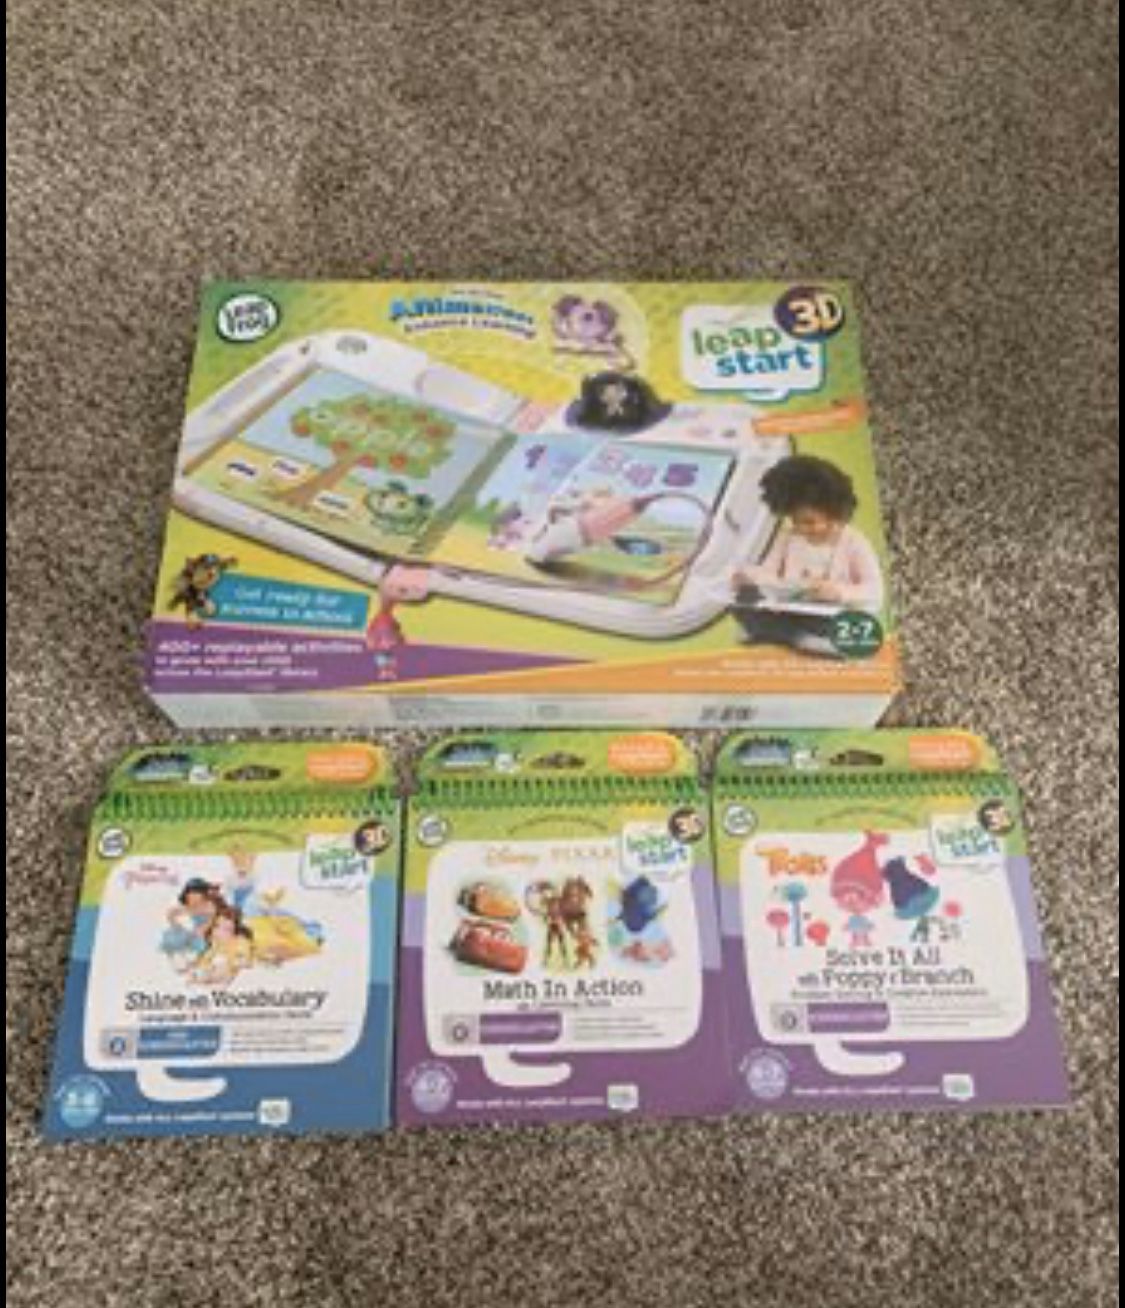 Leap Frog Leap Start 3D with 3 books